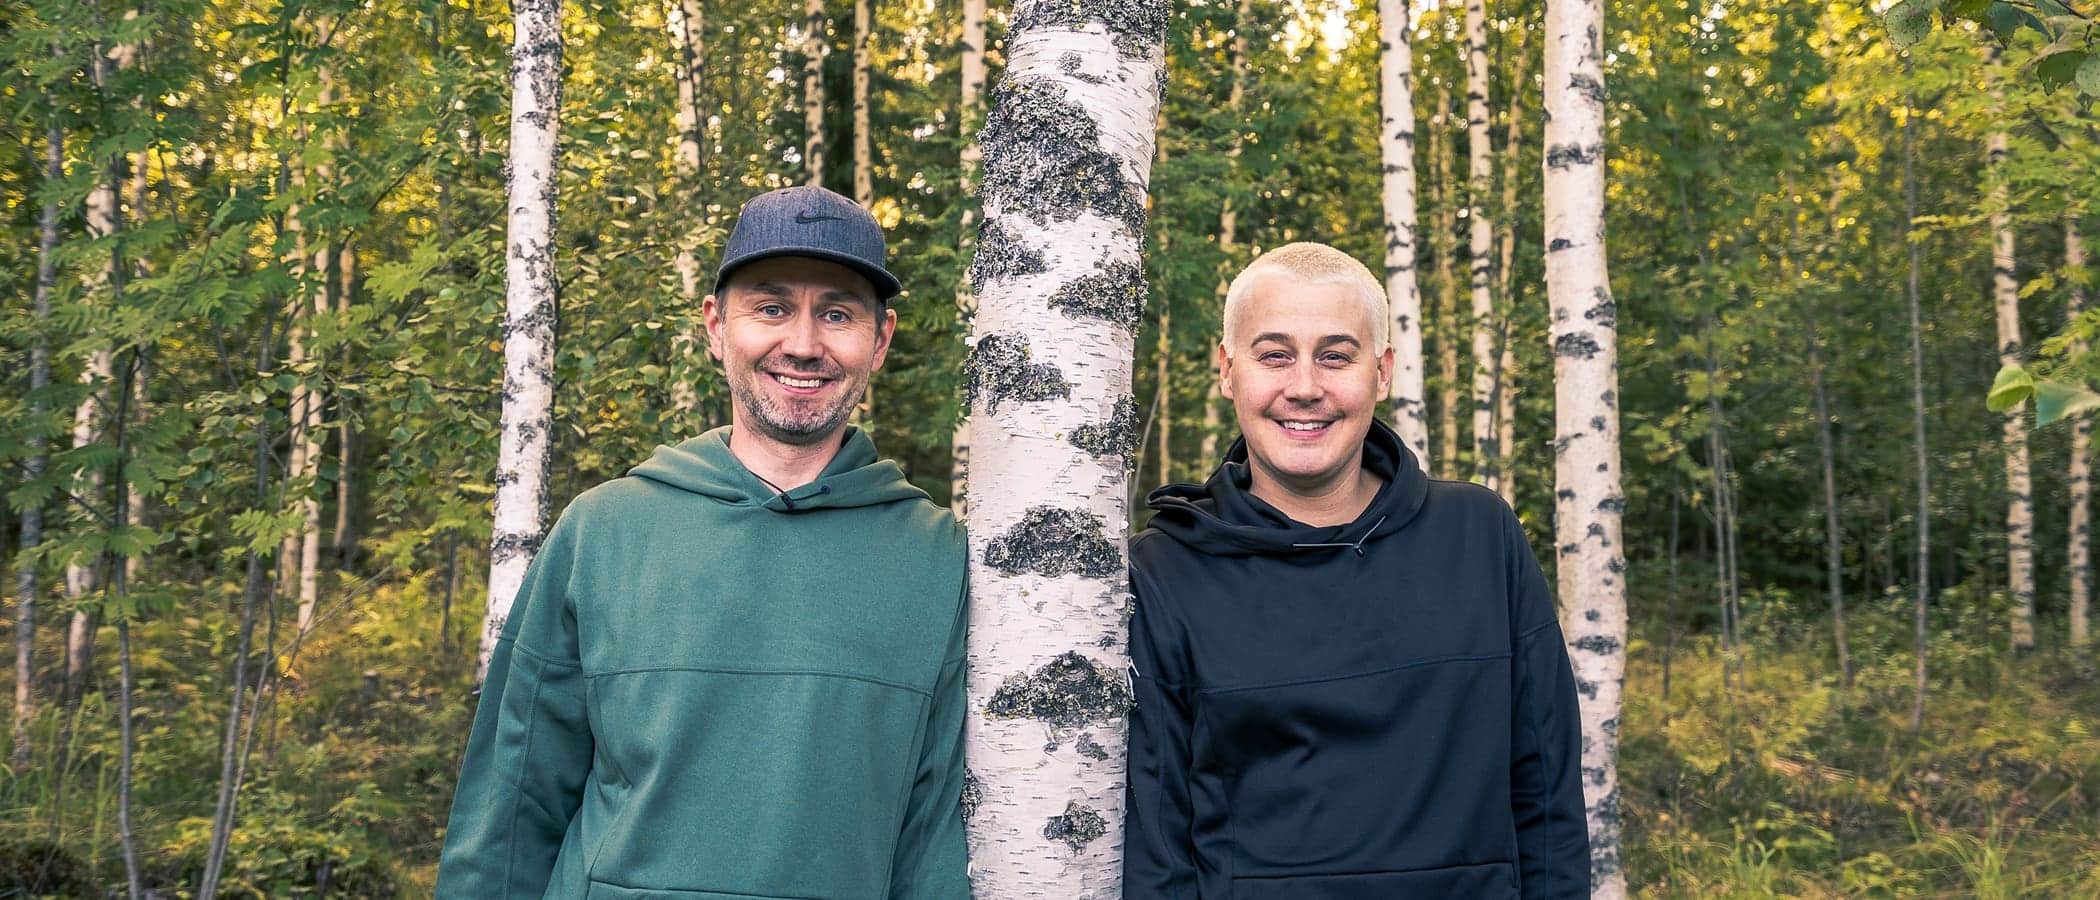 Two persons leaning against a tree and smiling.